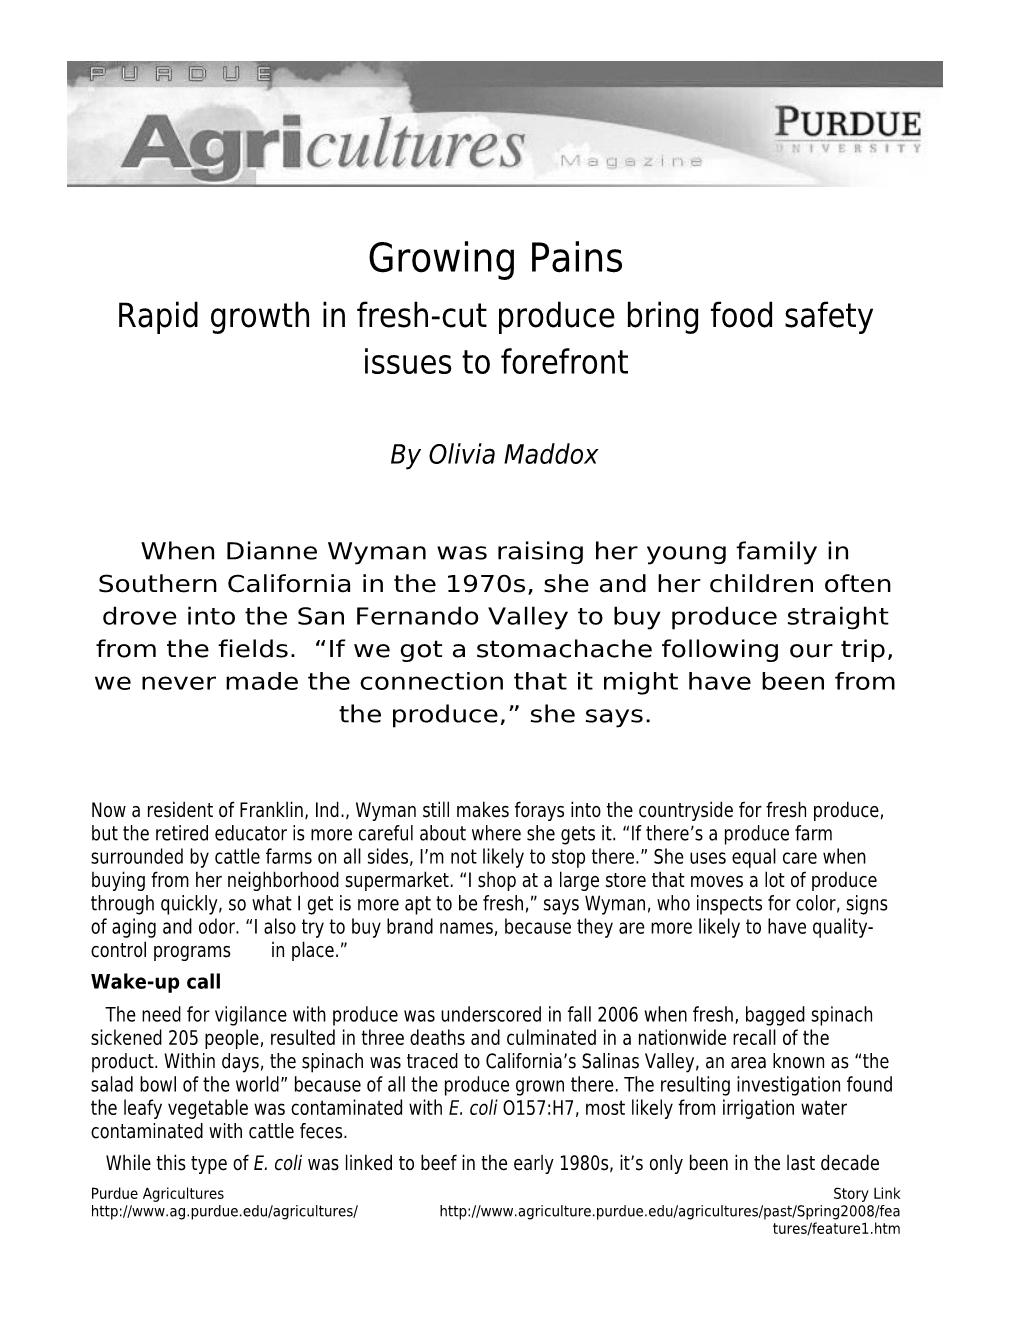 Rapid Growth in Fresh-Cut Produce Bring Food Safety Issues to Forefront